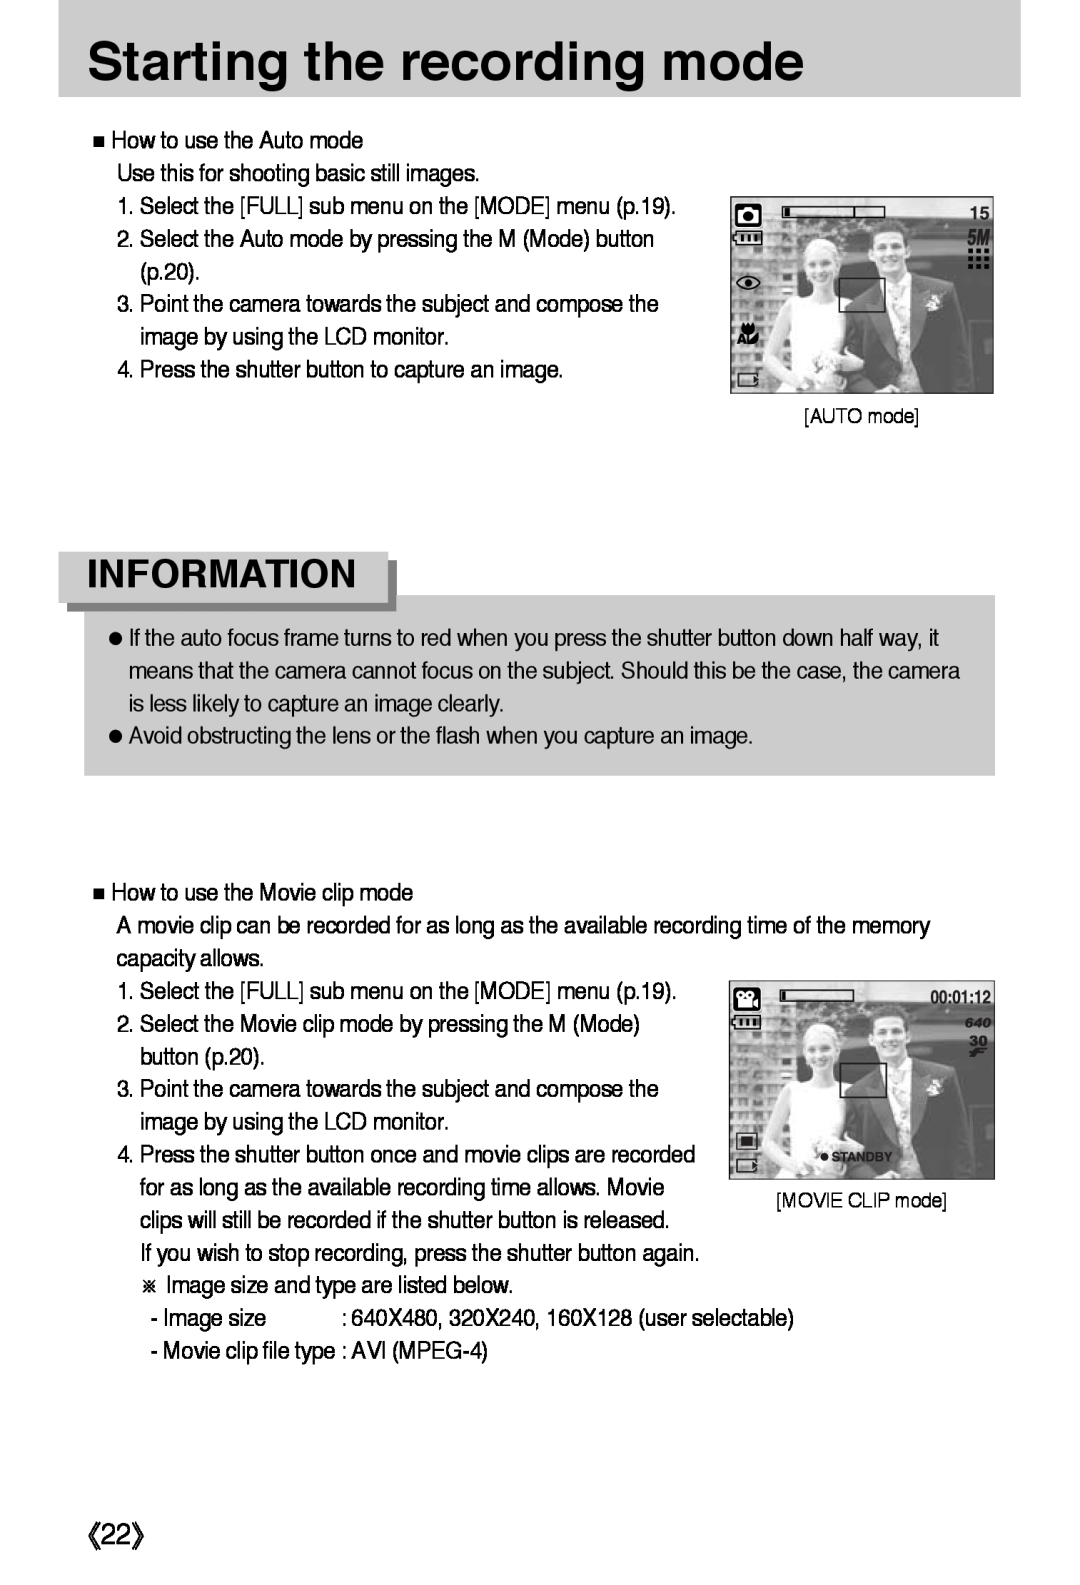 Samsung L50 user manual Starting the recording mode, 《22》, Information 